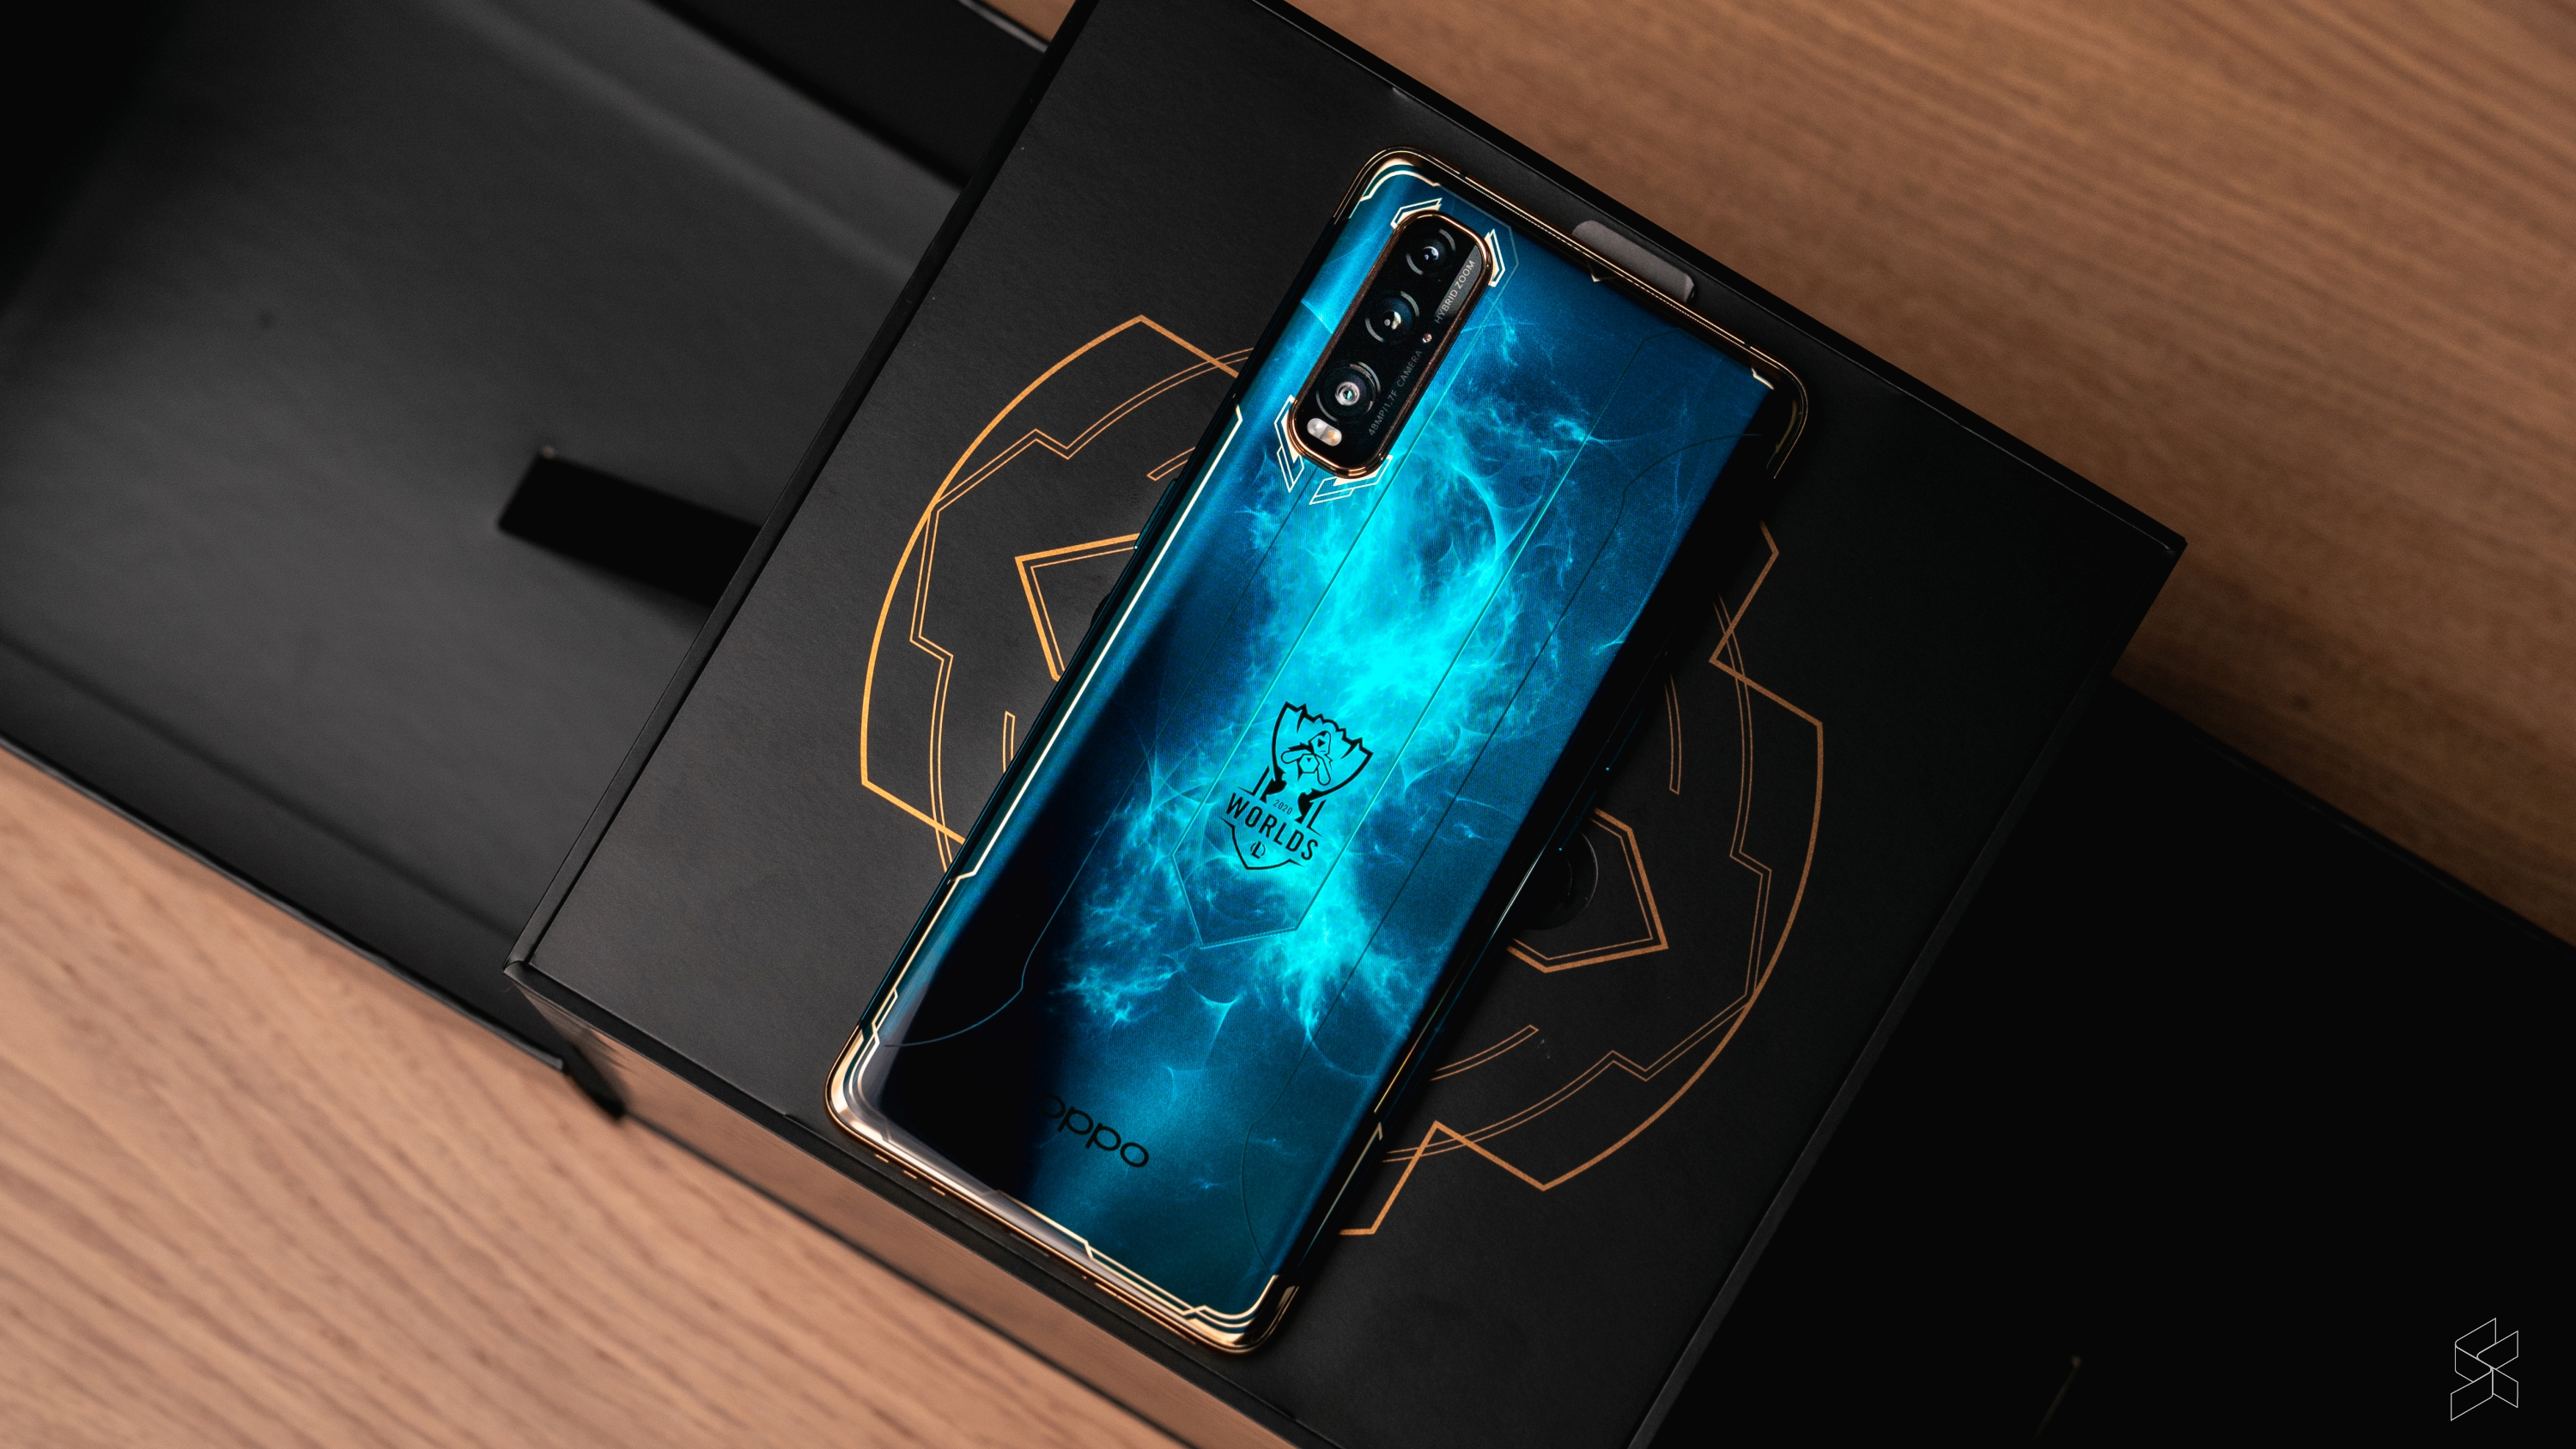 Oppo is launching a limited-edition League of Legends smartphone